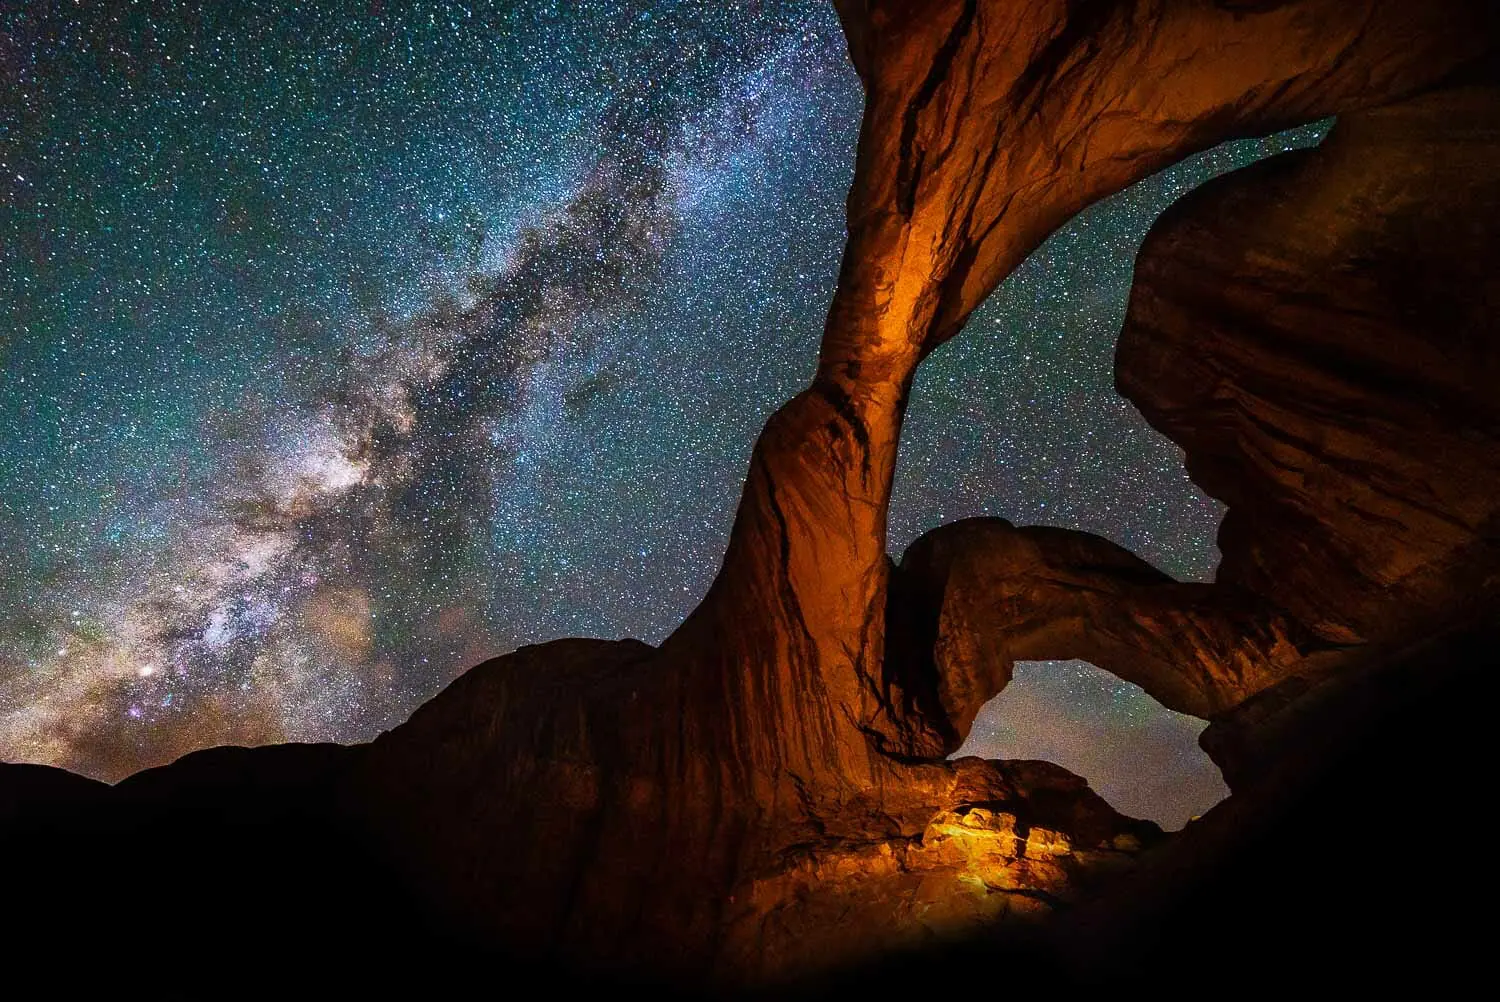 Milky Way shines over red rock natural arches